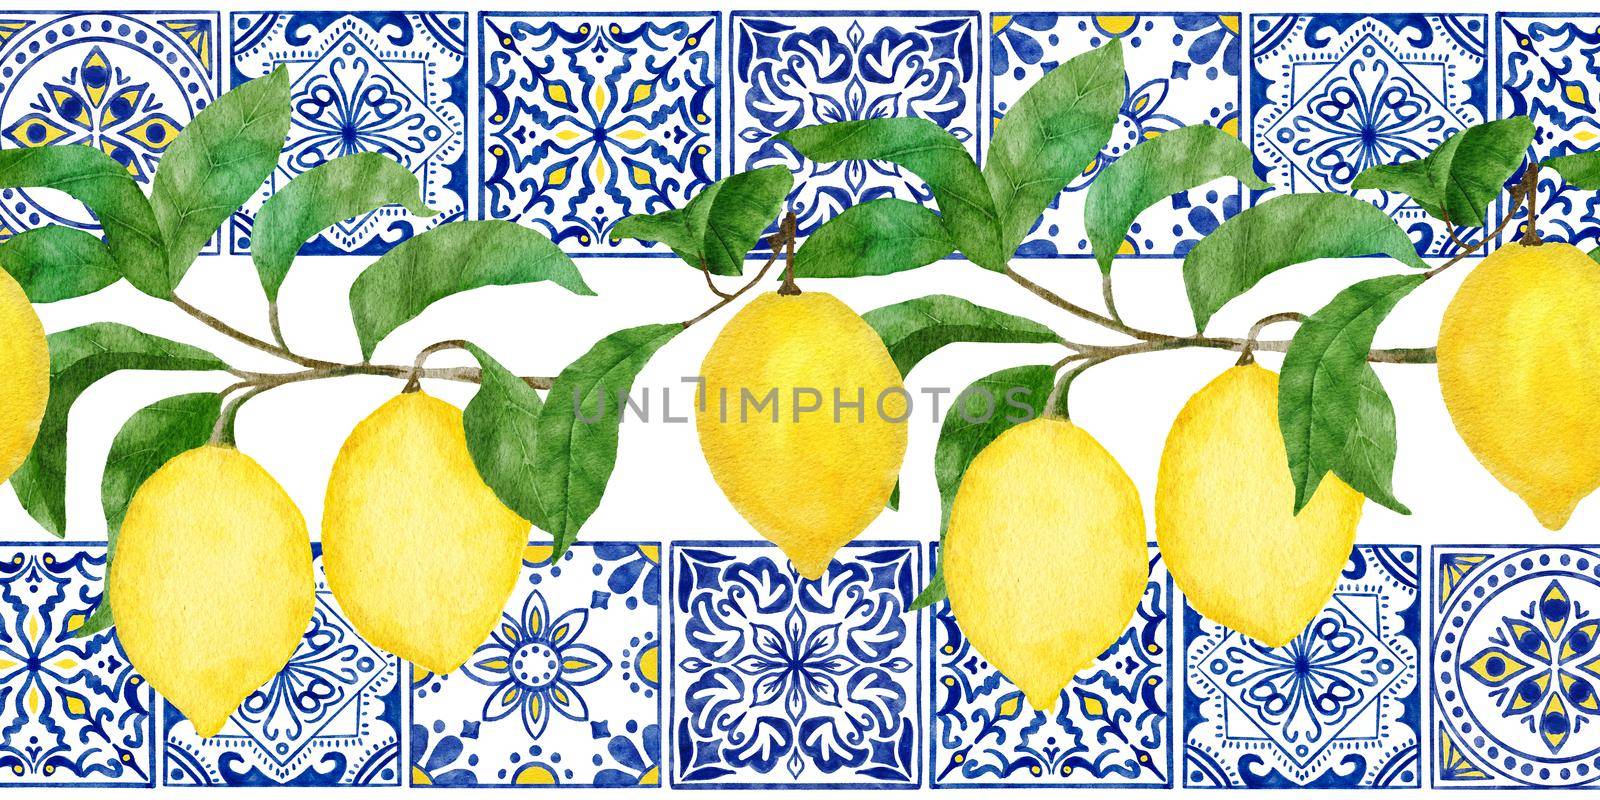 Hand drawn watercolor seamless border with yellow citrus lemons, blue white portugese azulejo tiles. Bright summer holiday vintage frame, tasty fruit healthy juicy ripe